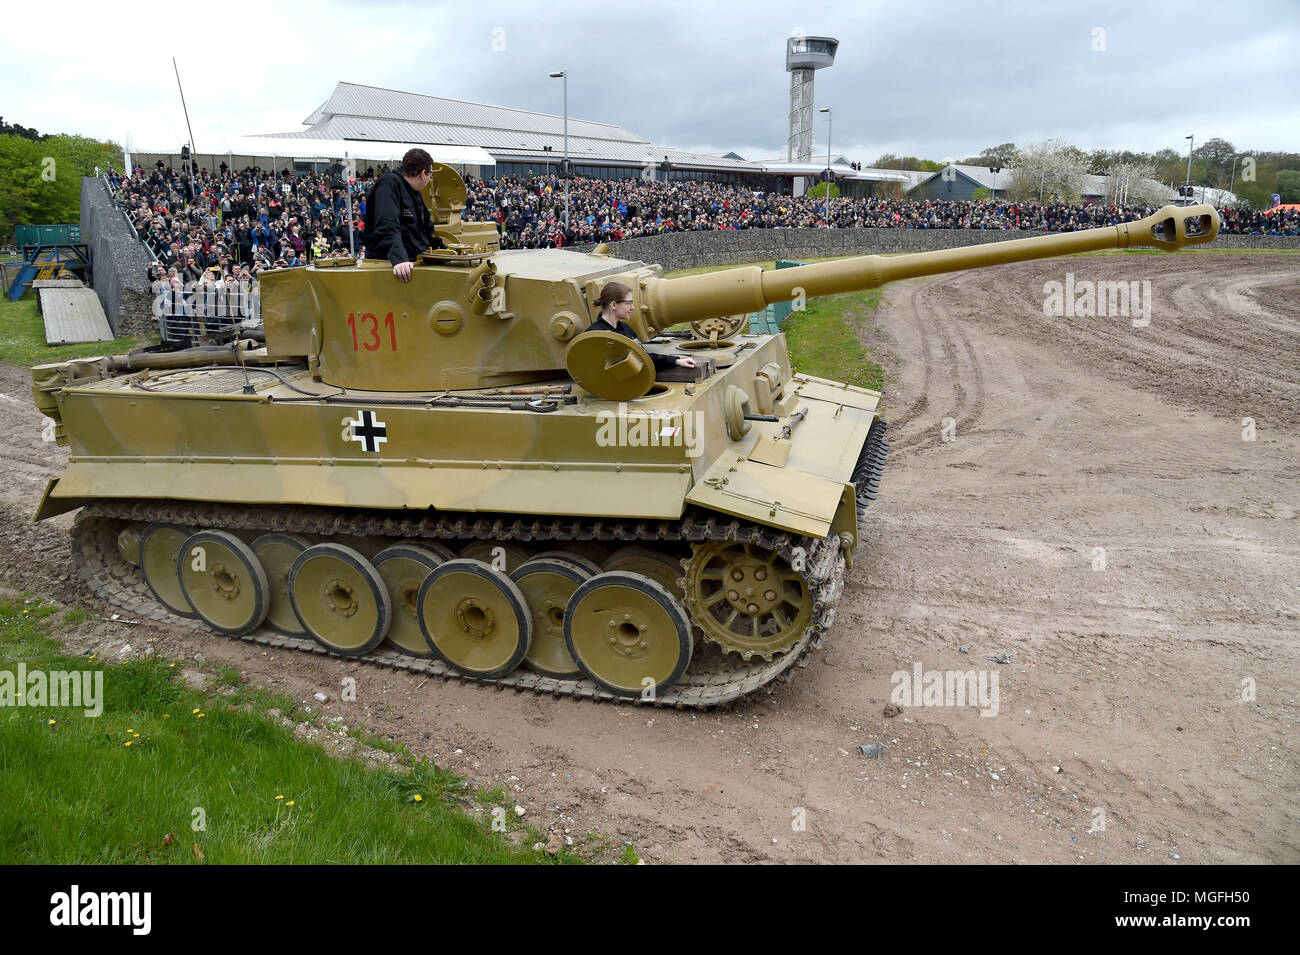 Tiger 131, world-famous Second World War tank, the only operating Tiger I in the world, takes to the parade ground at Bovington Tank Museum, Dorset. Credit: Finnbarr Webster/Alamy Live News Stock Photo